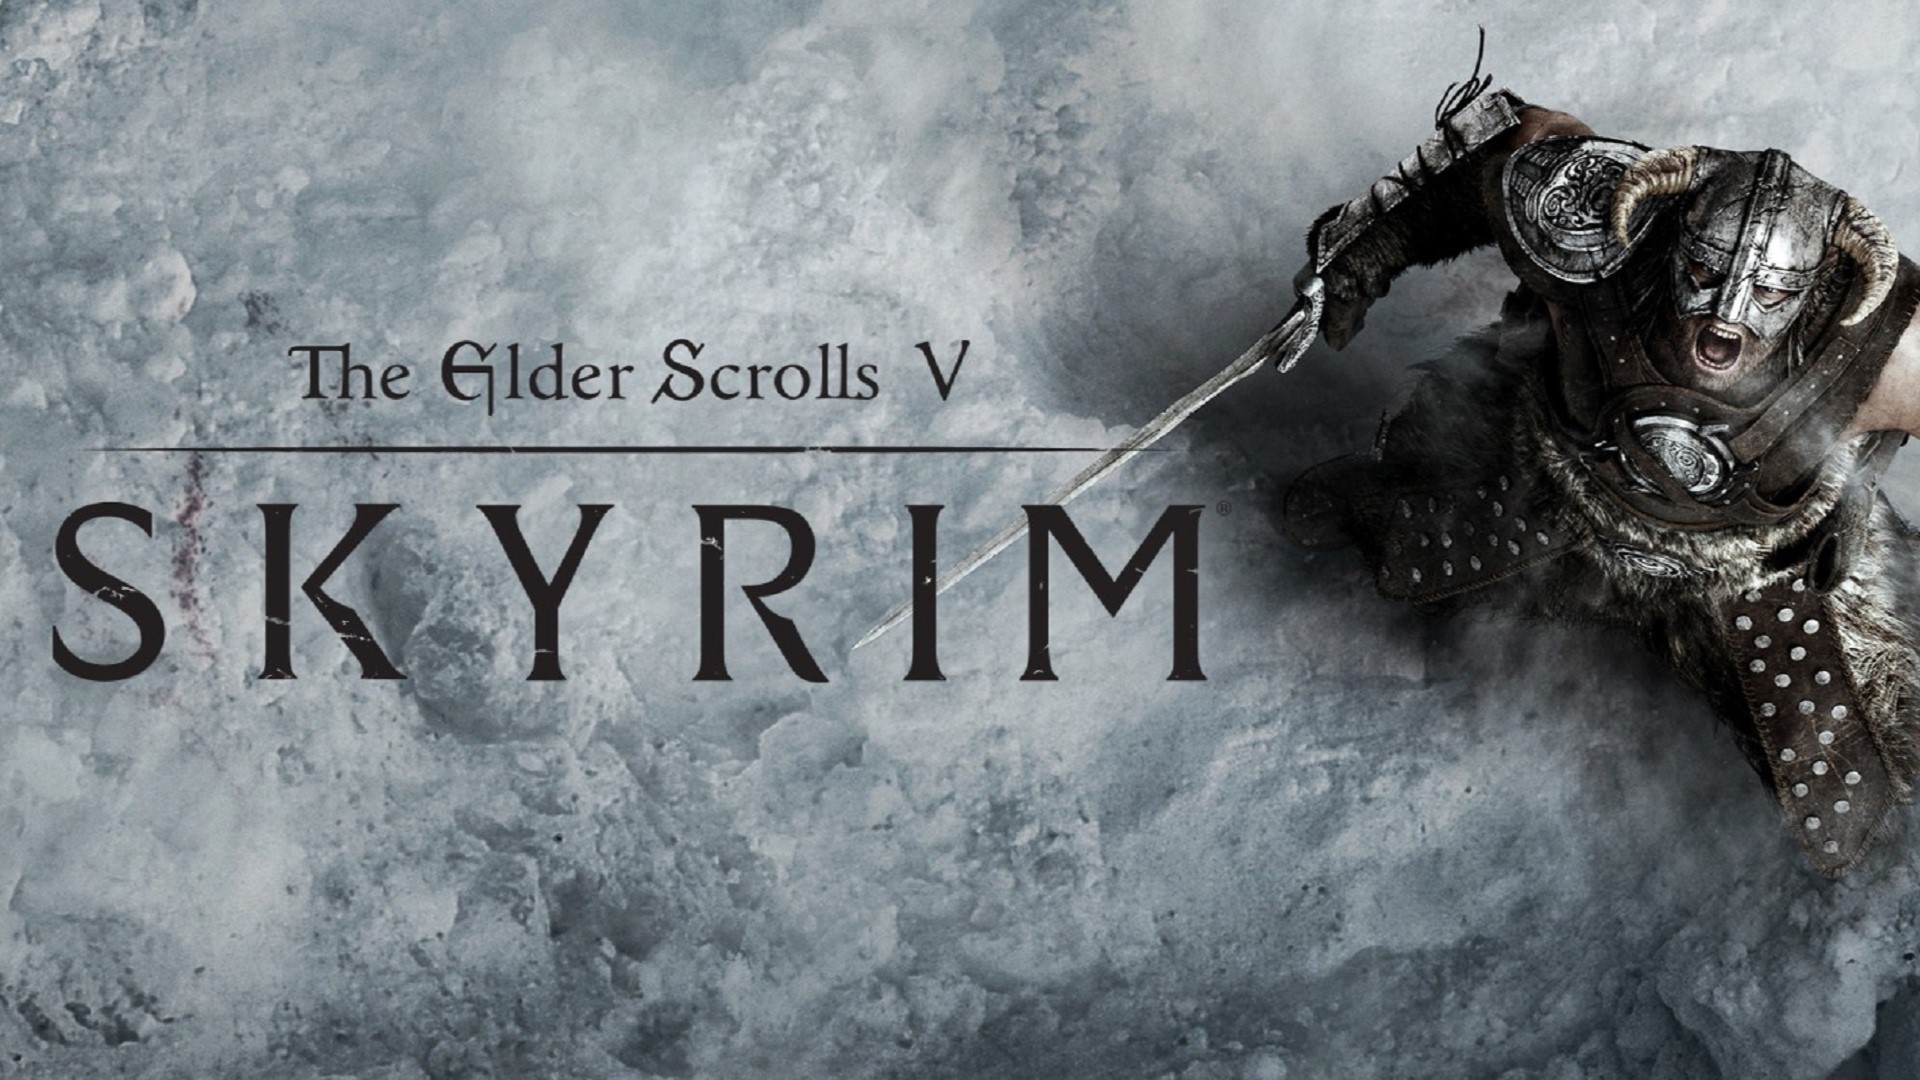 skyrim-console-commands-skill-cheats-god-mode-and-infinite-gold